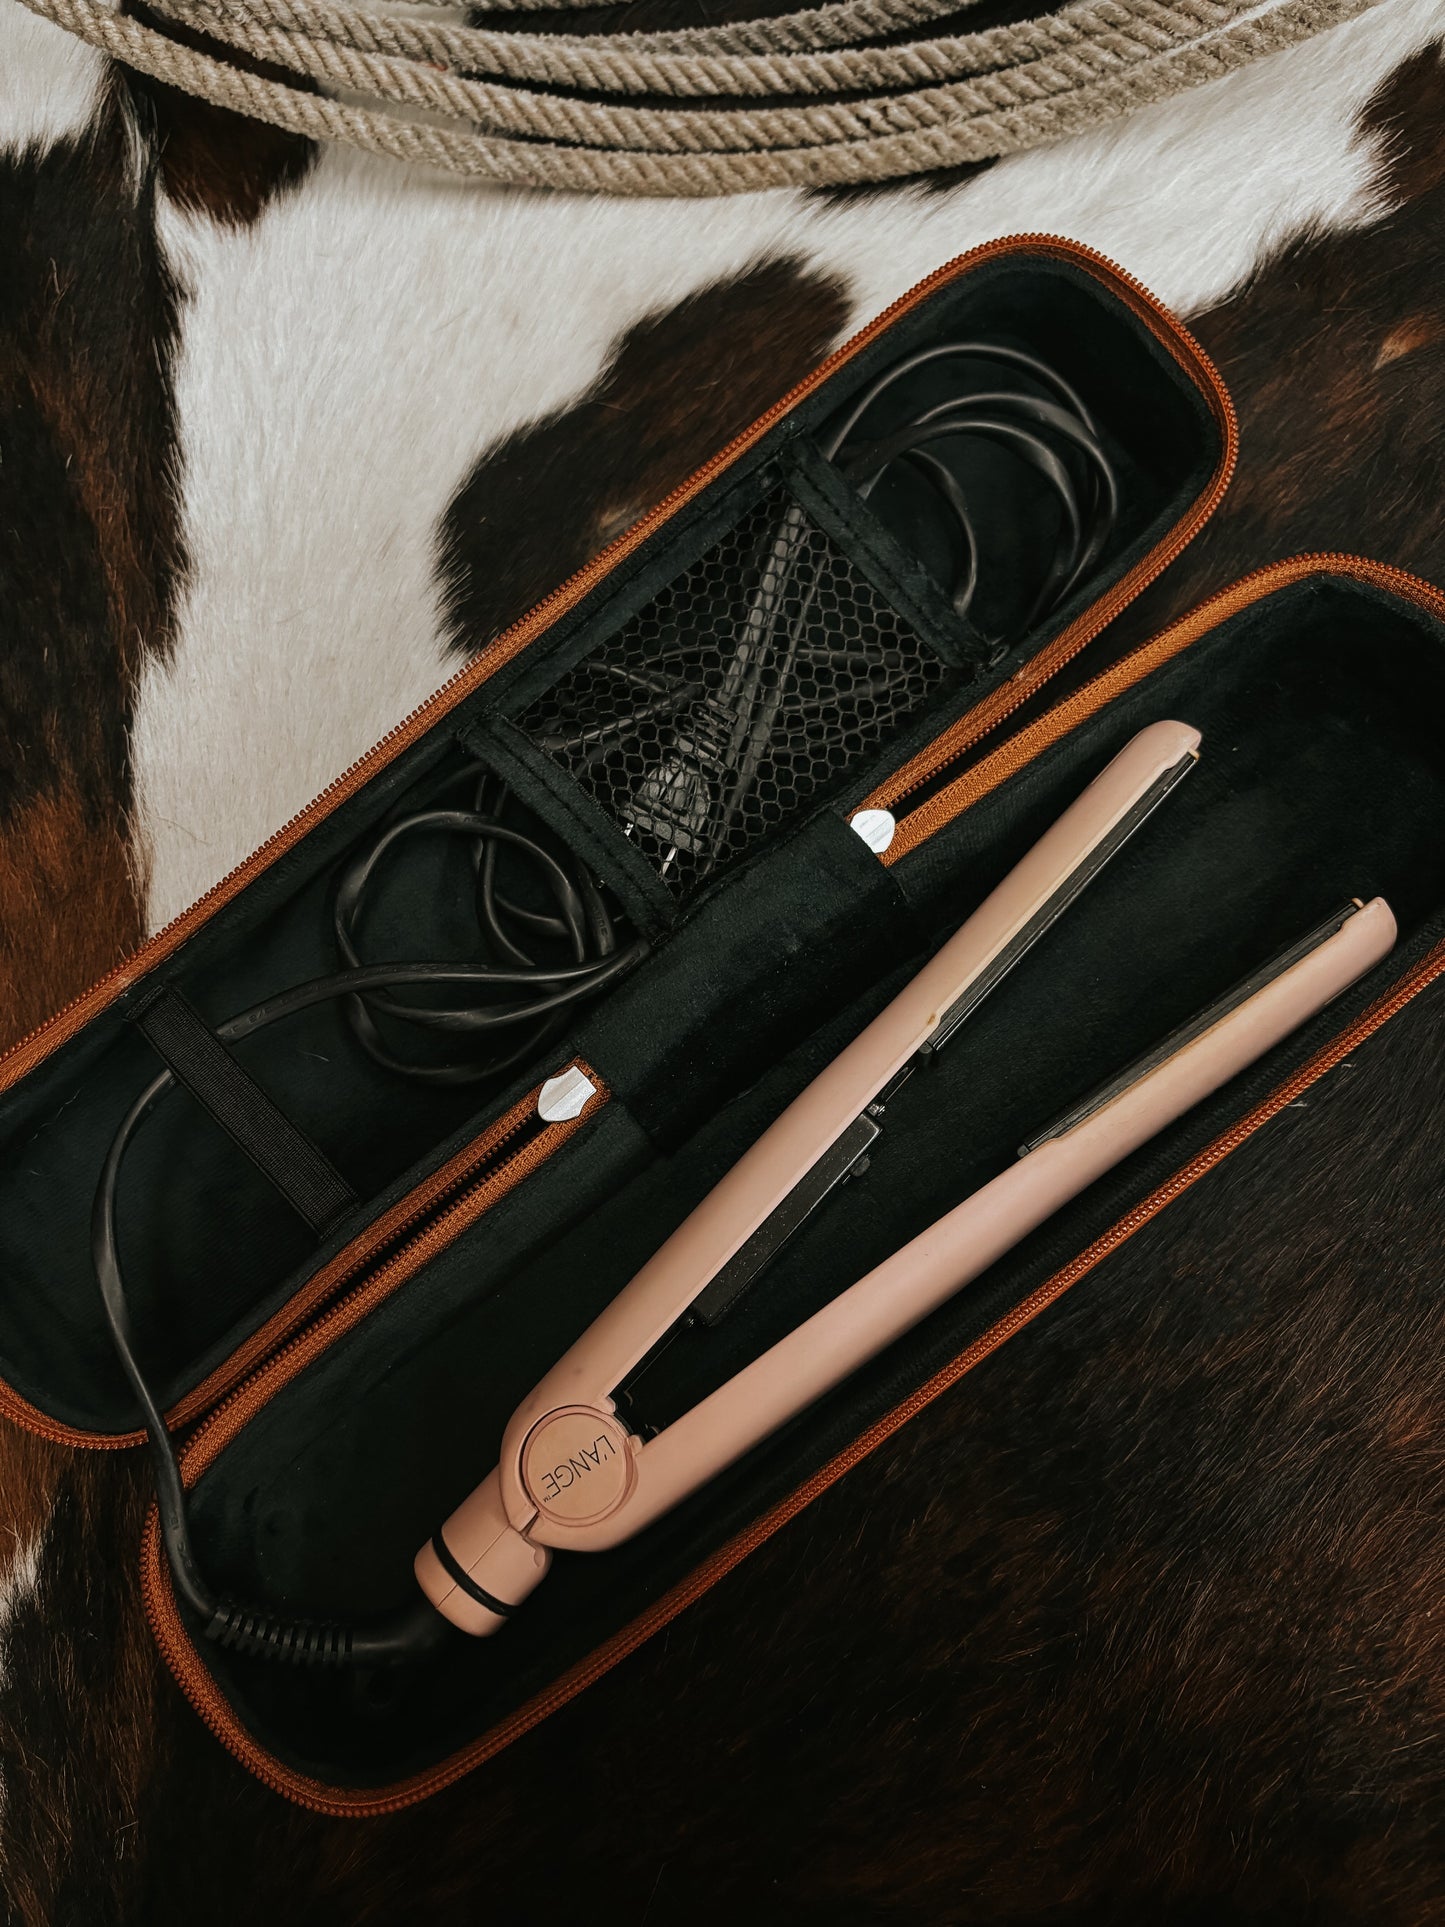 The Cowhide Hot Tool Traveling/Storage Case